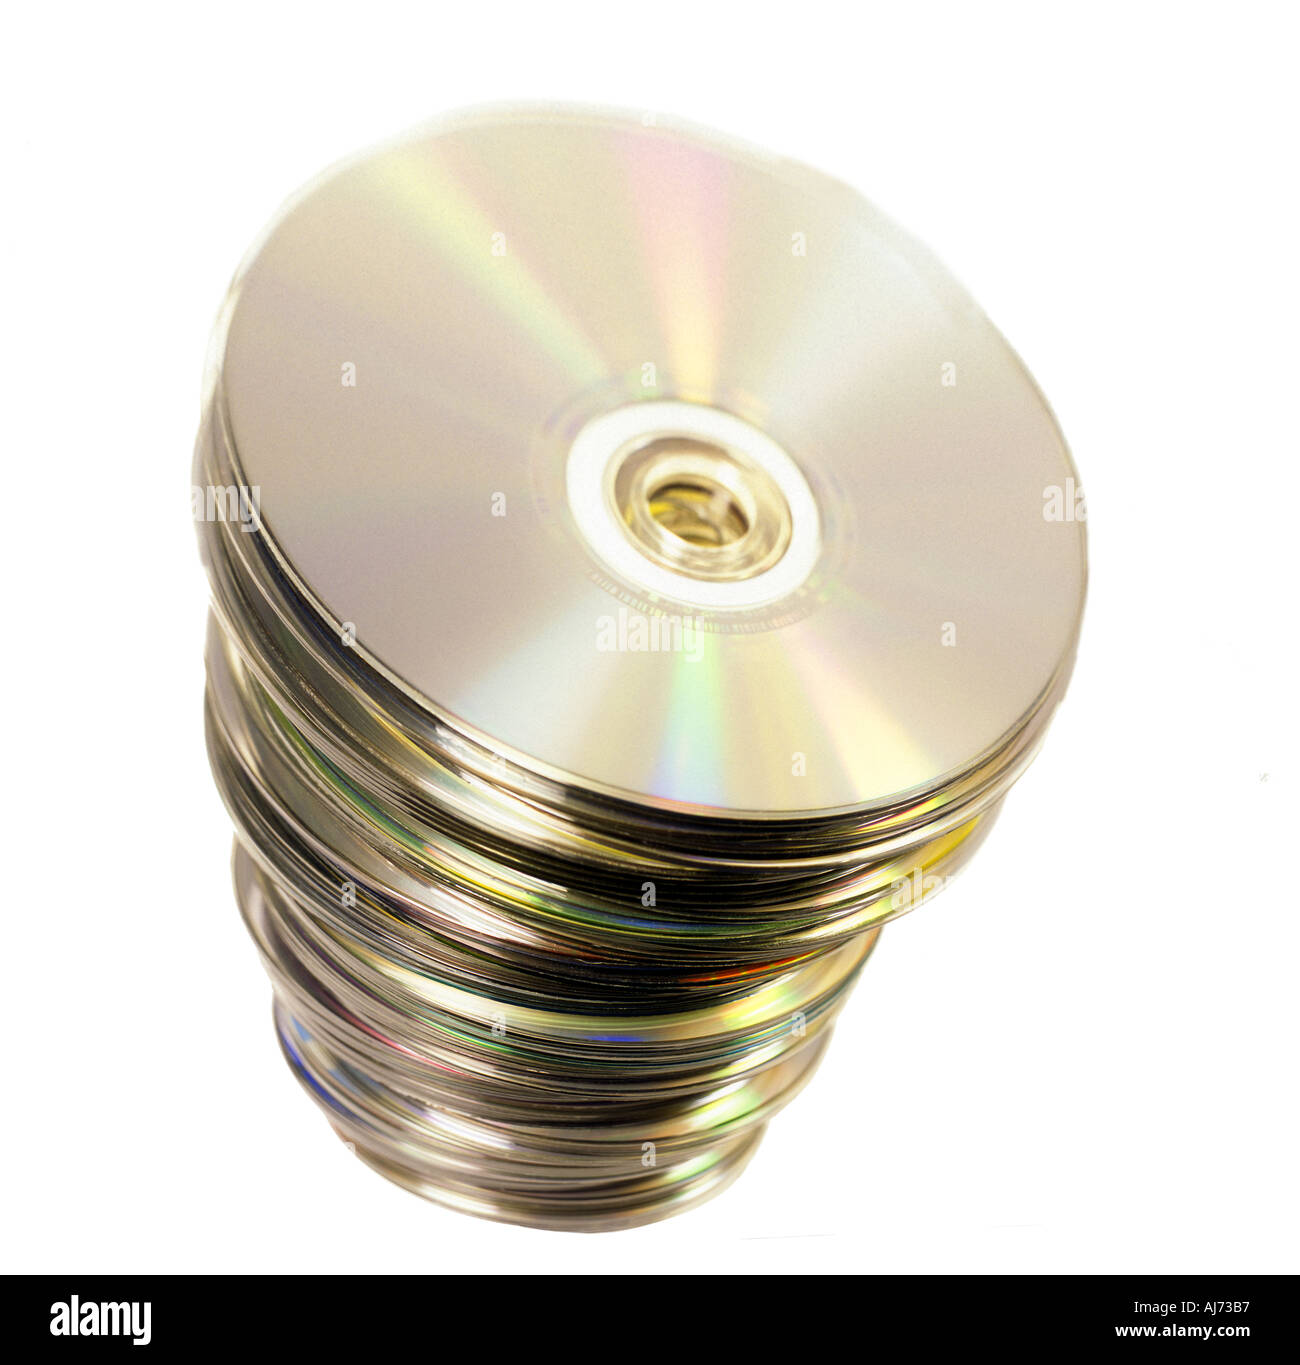 Stack of CDs Stock Photo